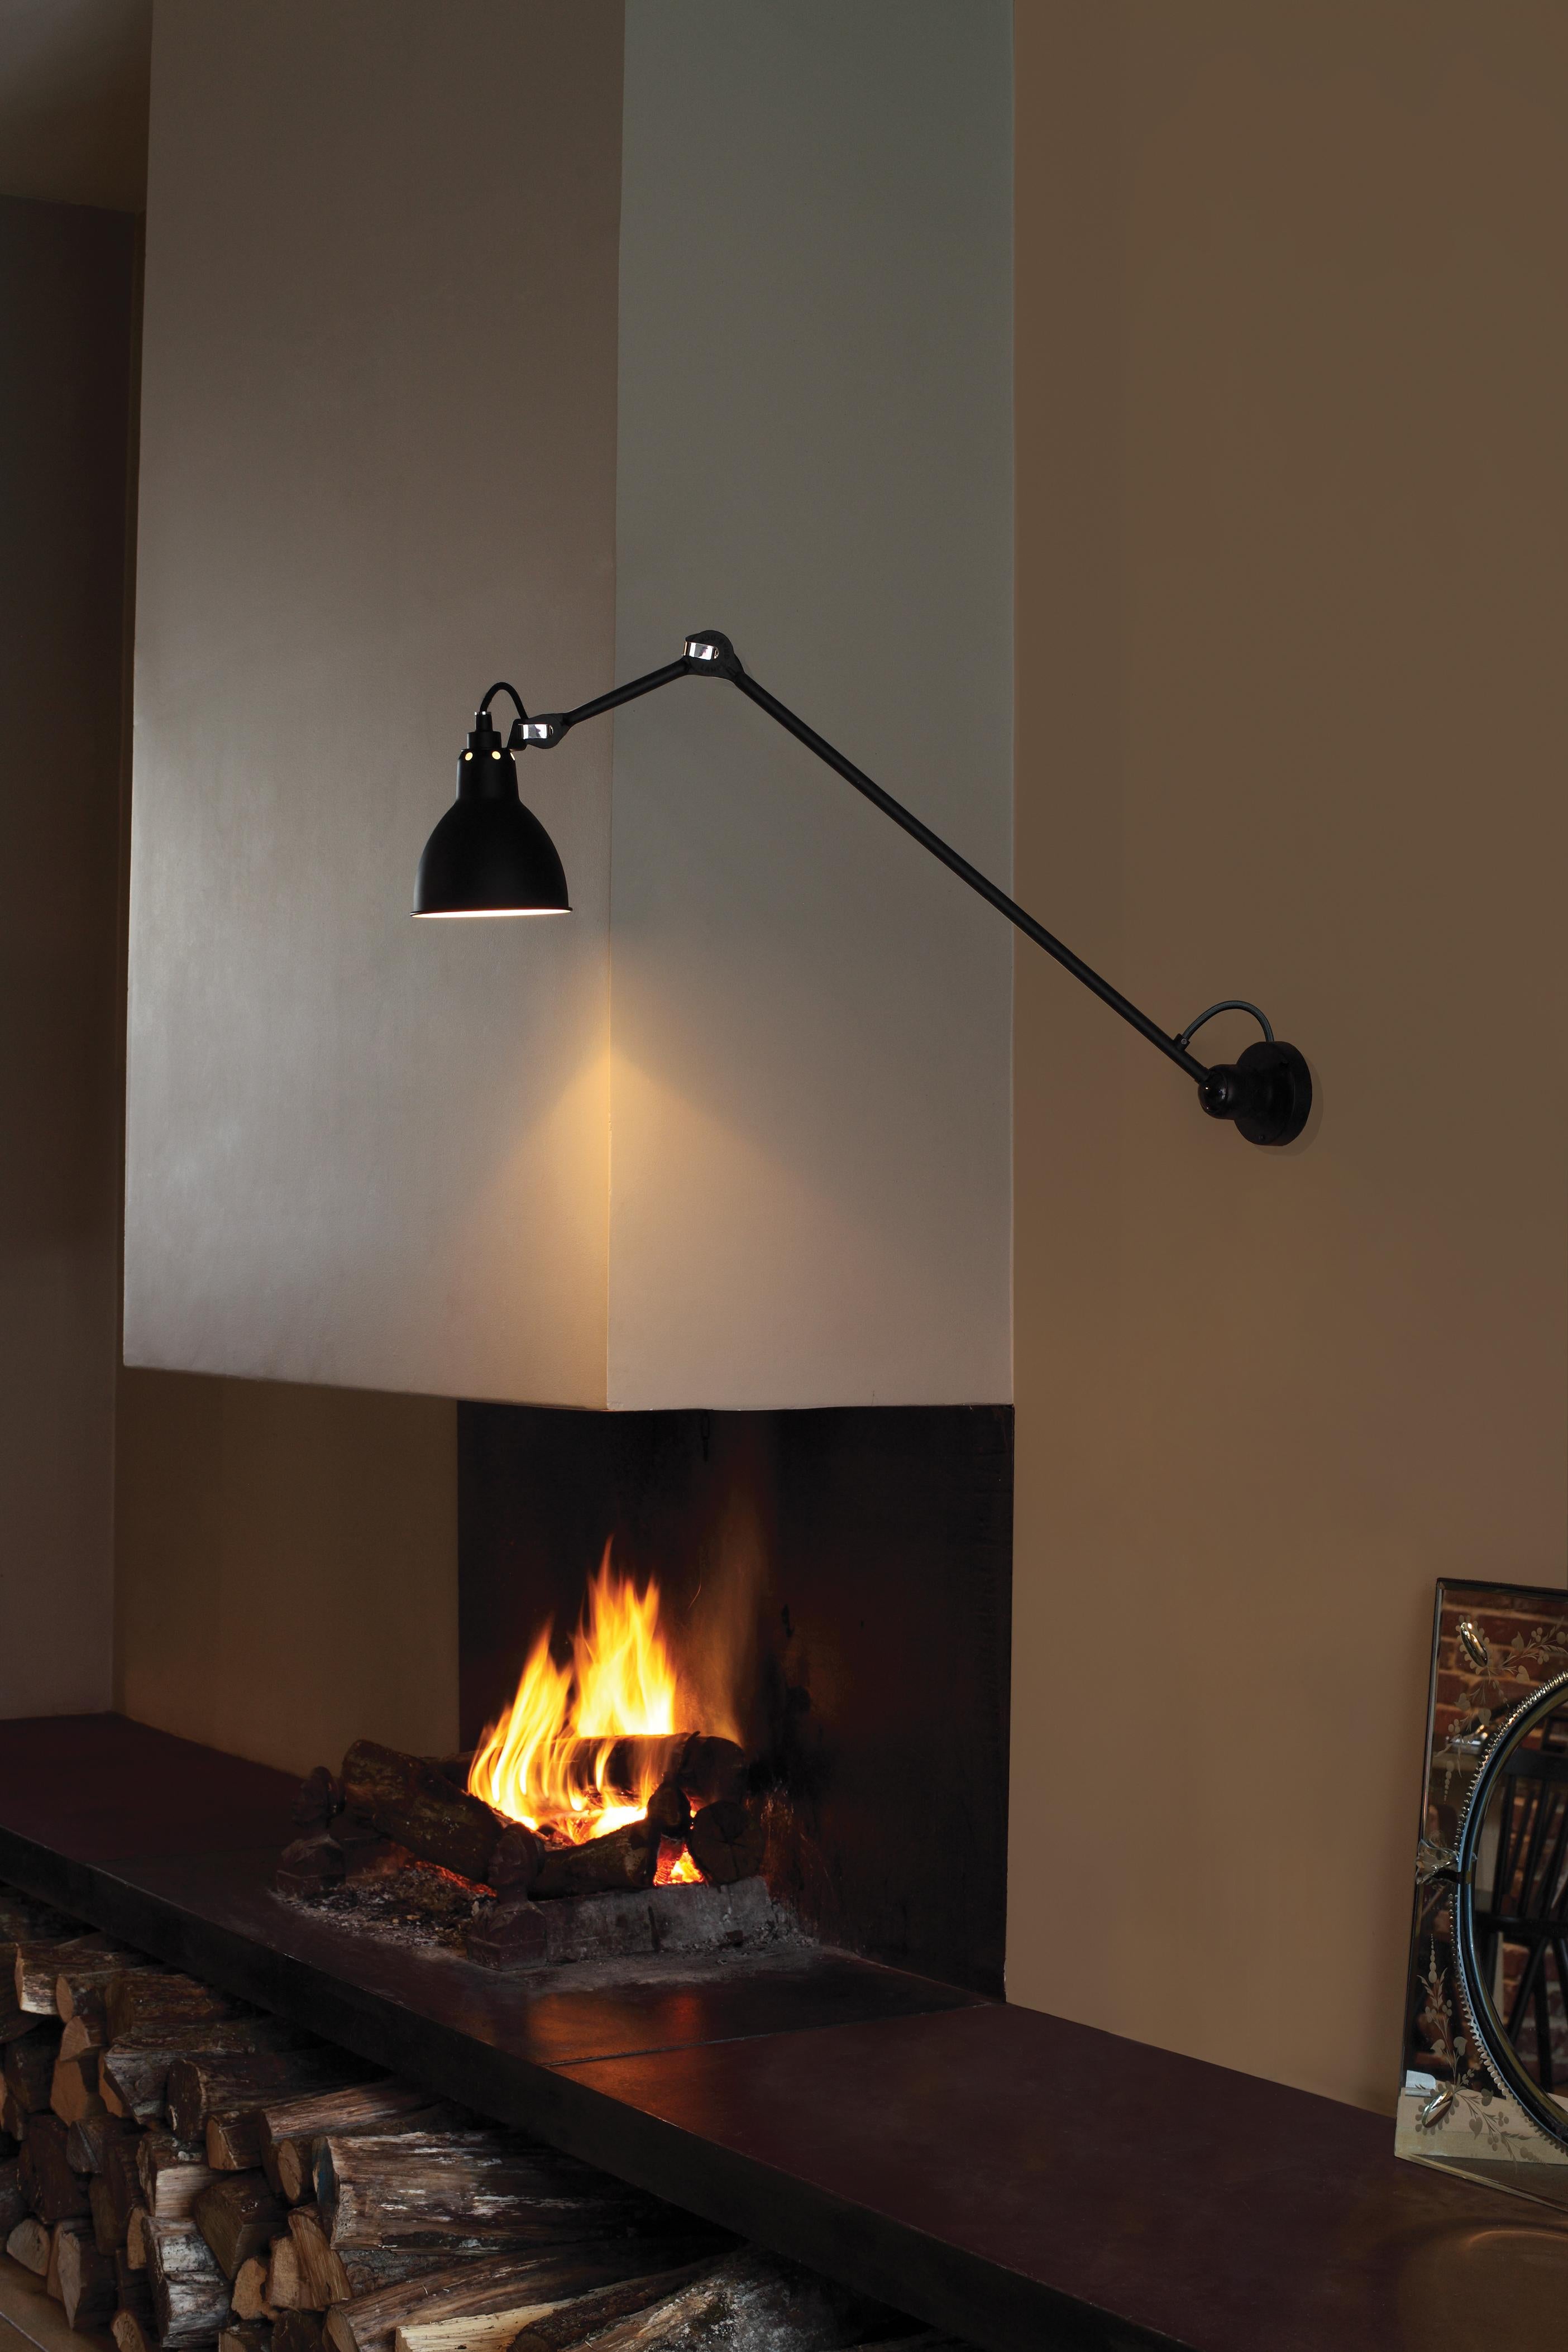 DCW Editions La Lampe Gras N°304 L60 Wall Lamp in Black Steel Arm and Red Shade by Bernard-Albin Gras
 
 In 1921 Bernard-Albin GRAS designed a series of lamps for use in offices and in industrial environments. The GRAS lamp, as it was subsequently